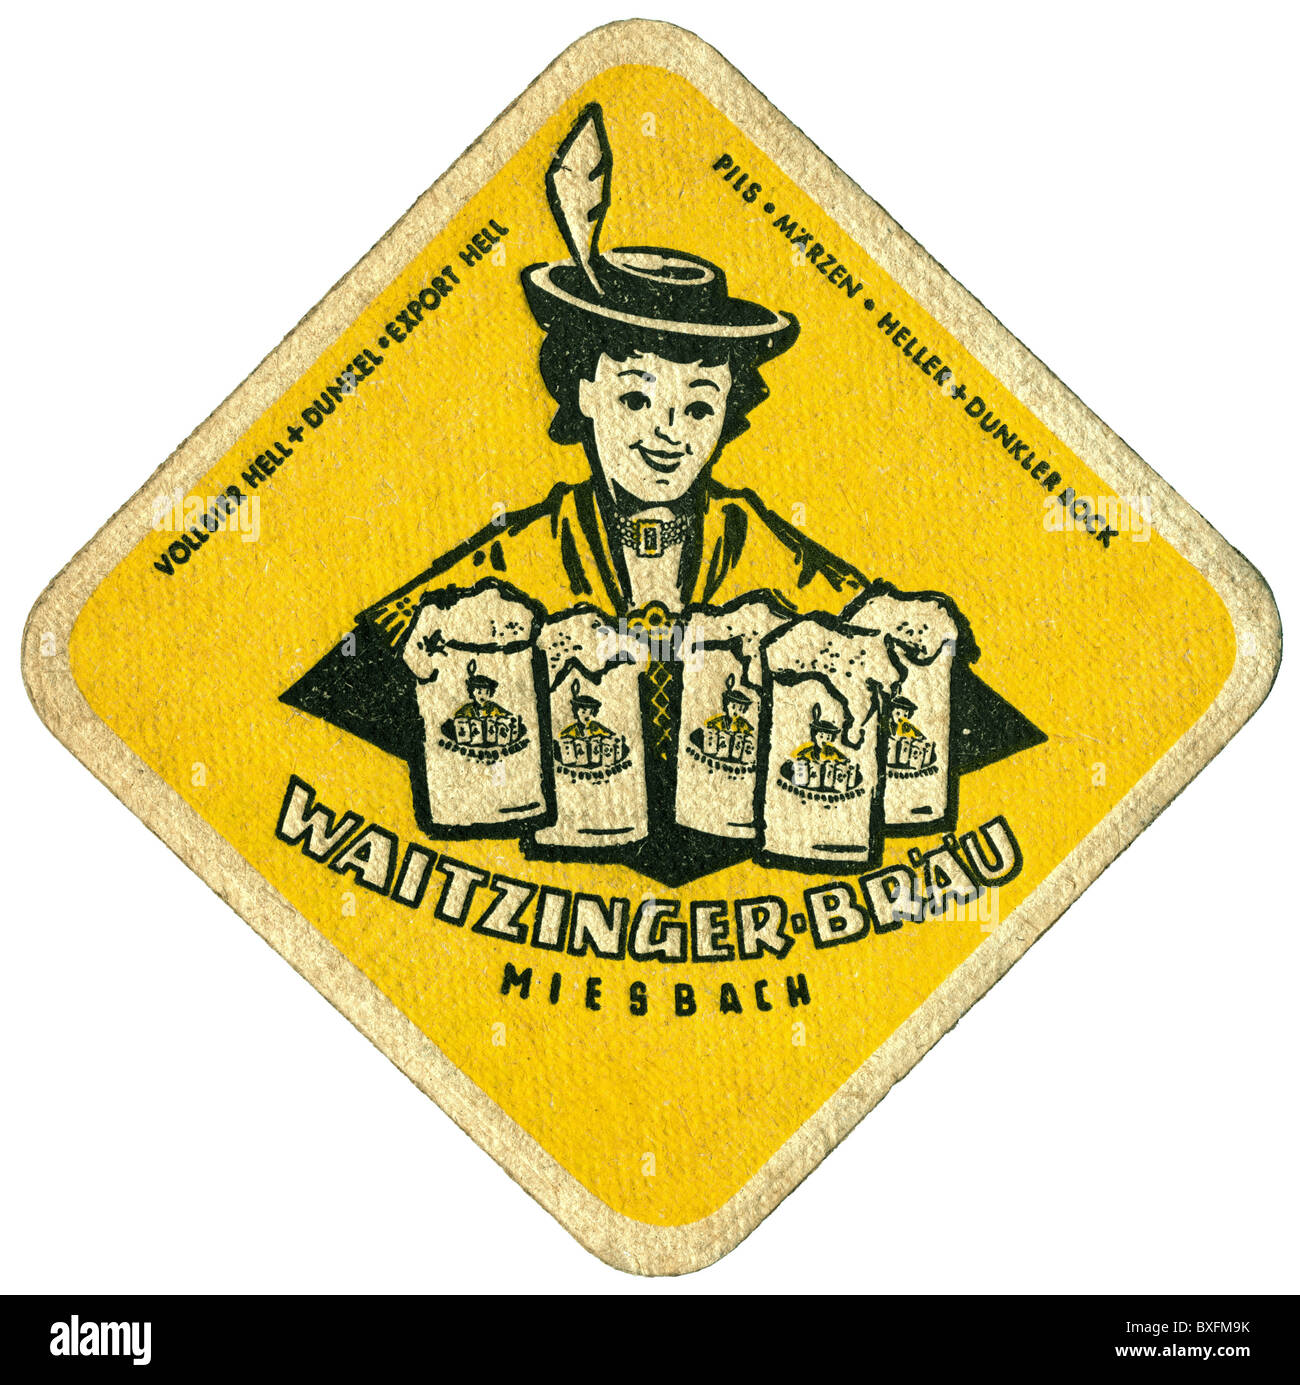 alcohol, beer, beer mat, Waitzinger-Braeu, Miesbach, Upper Bavaria, brewery closed in 1977, Bavaria, Germany, circa 1966, 1960s, 60s, 20th century, historic, historical, waitress, waitresses, traditional costume, national costume, dress, traditional costumes, national costumes, dresses, Bavarian, tradition, traditions, drink, drinking, cardboard, pasteboard, paperboard, clipping, cut out, cut-out, cut-outs, beer mat, coaster, beer mats, coasters, Additional-Rights-Clearences-Not Available Stock Photo